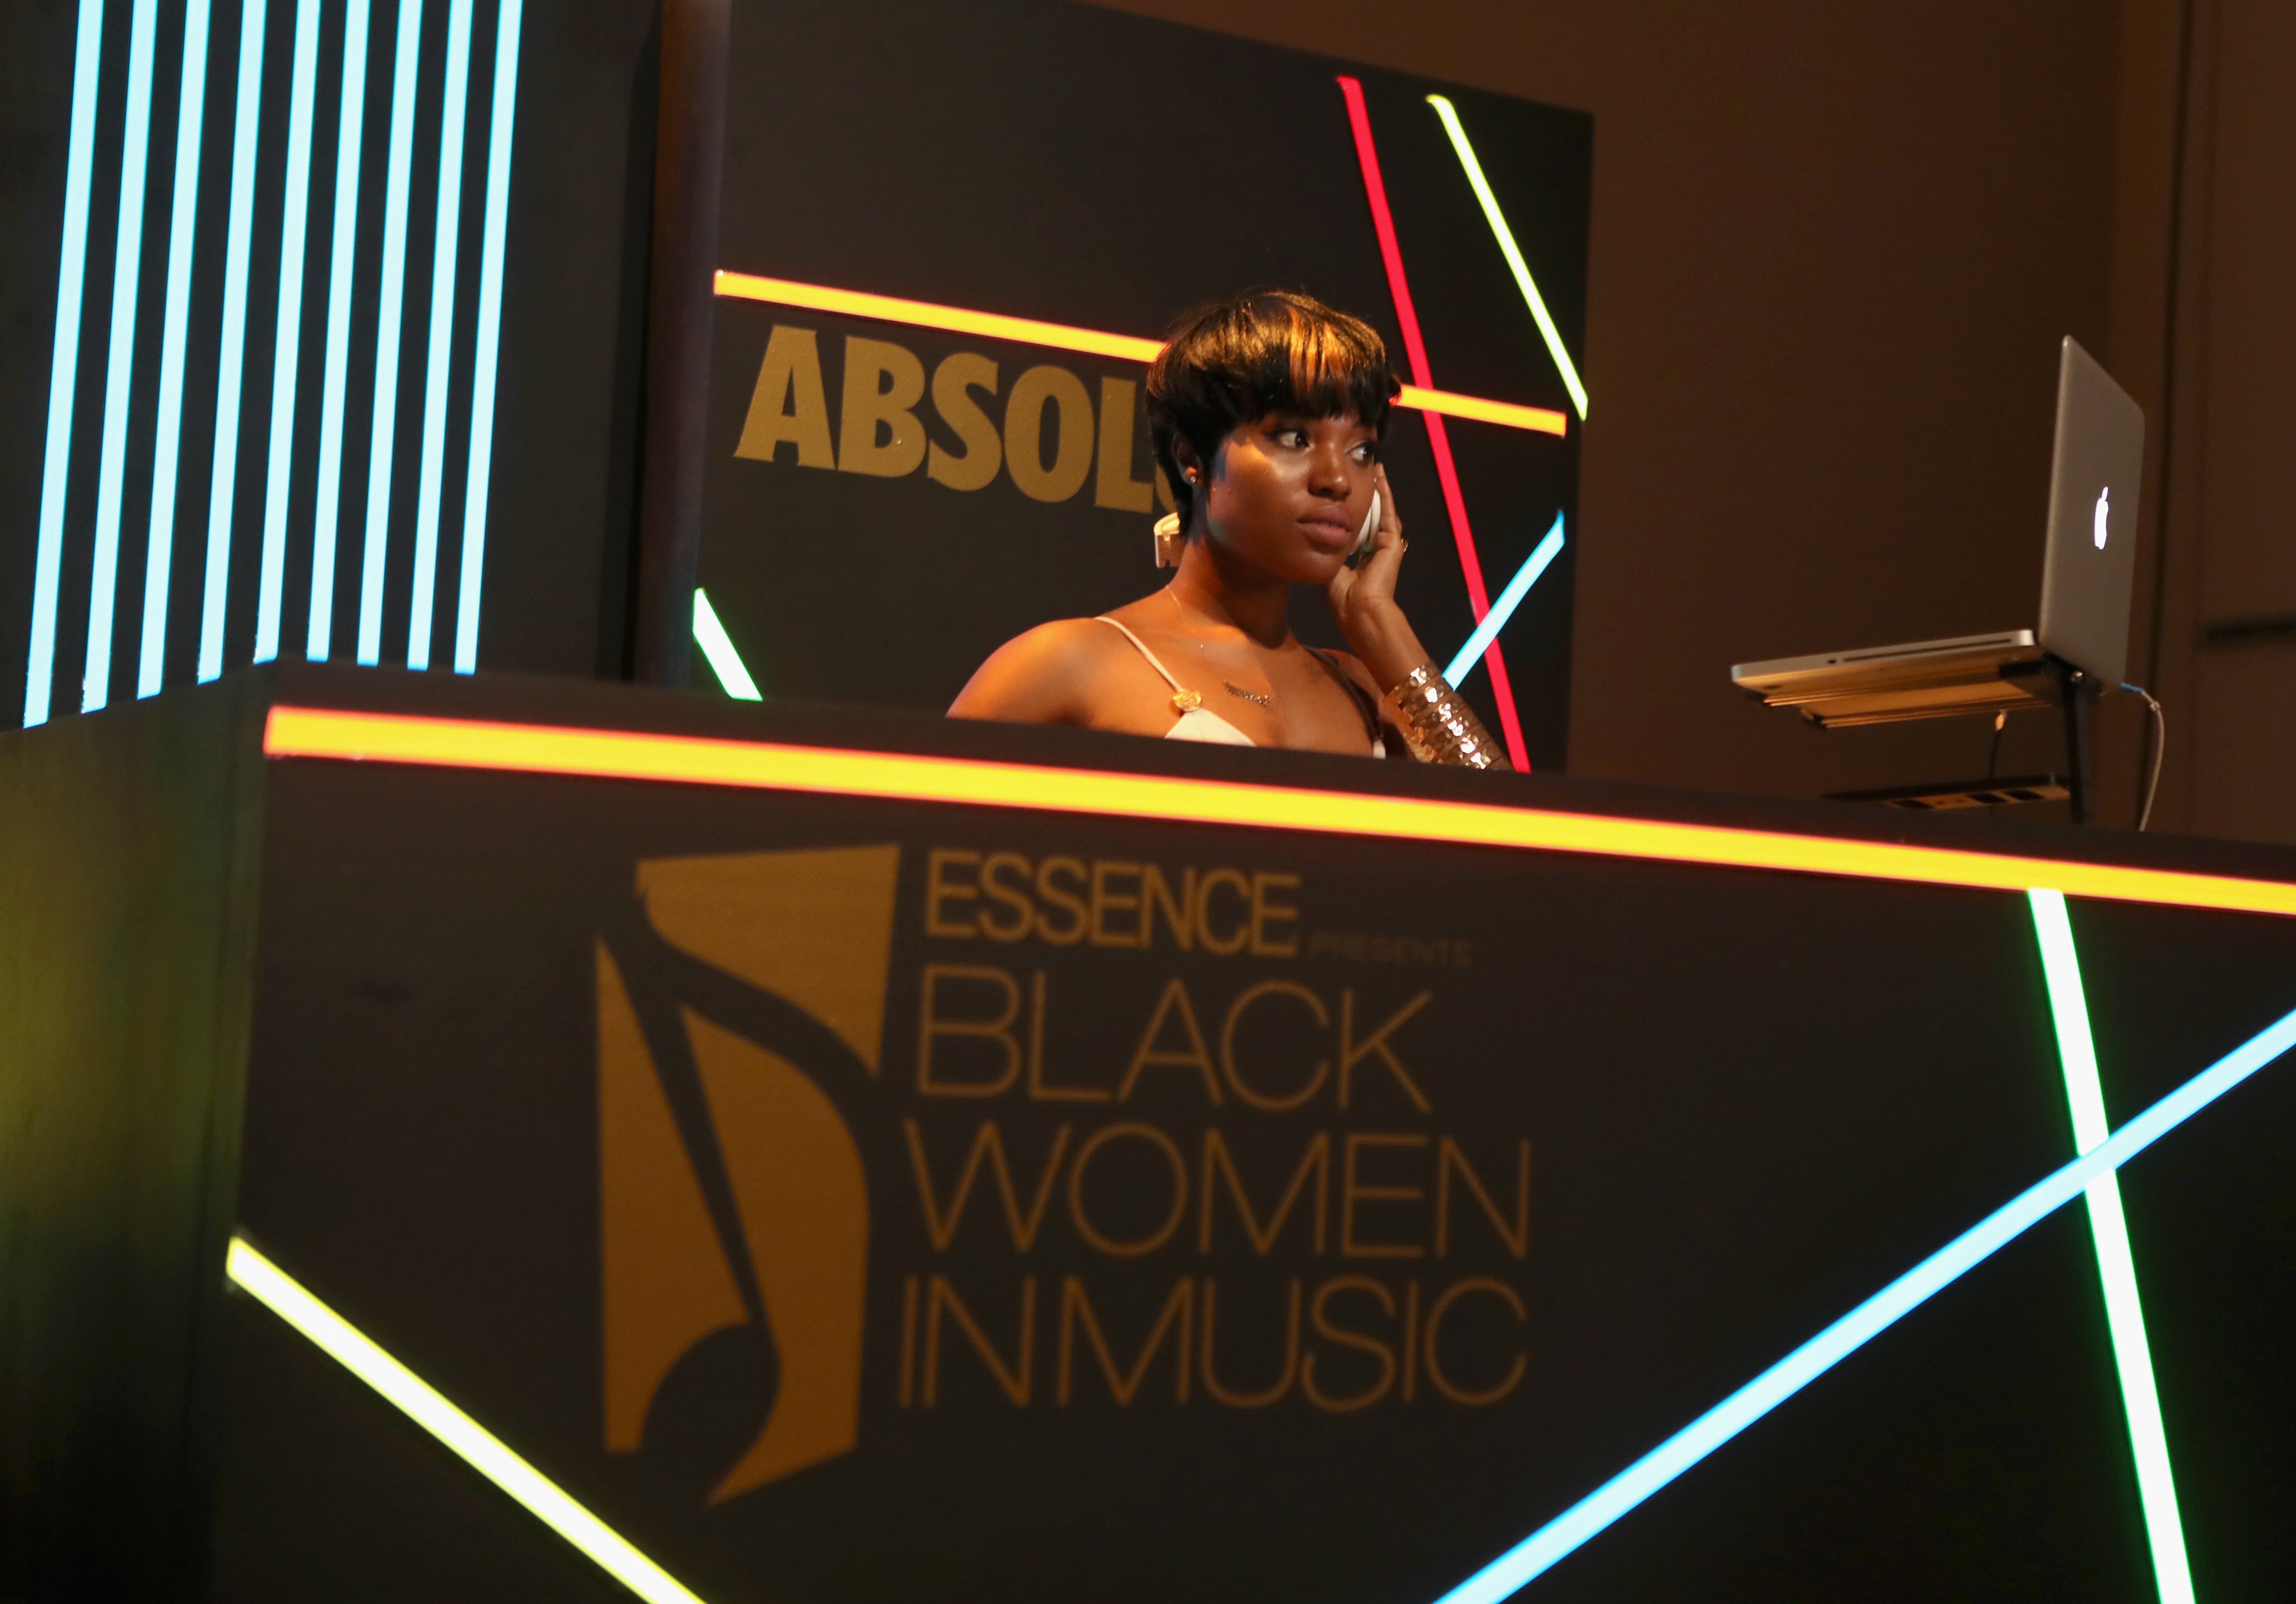 A Look Inside The Star-Studded 2017 ESSENCE Black Women In Music
